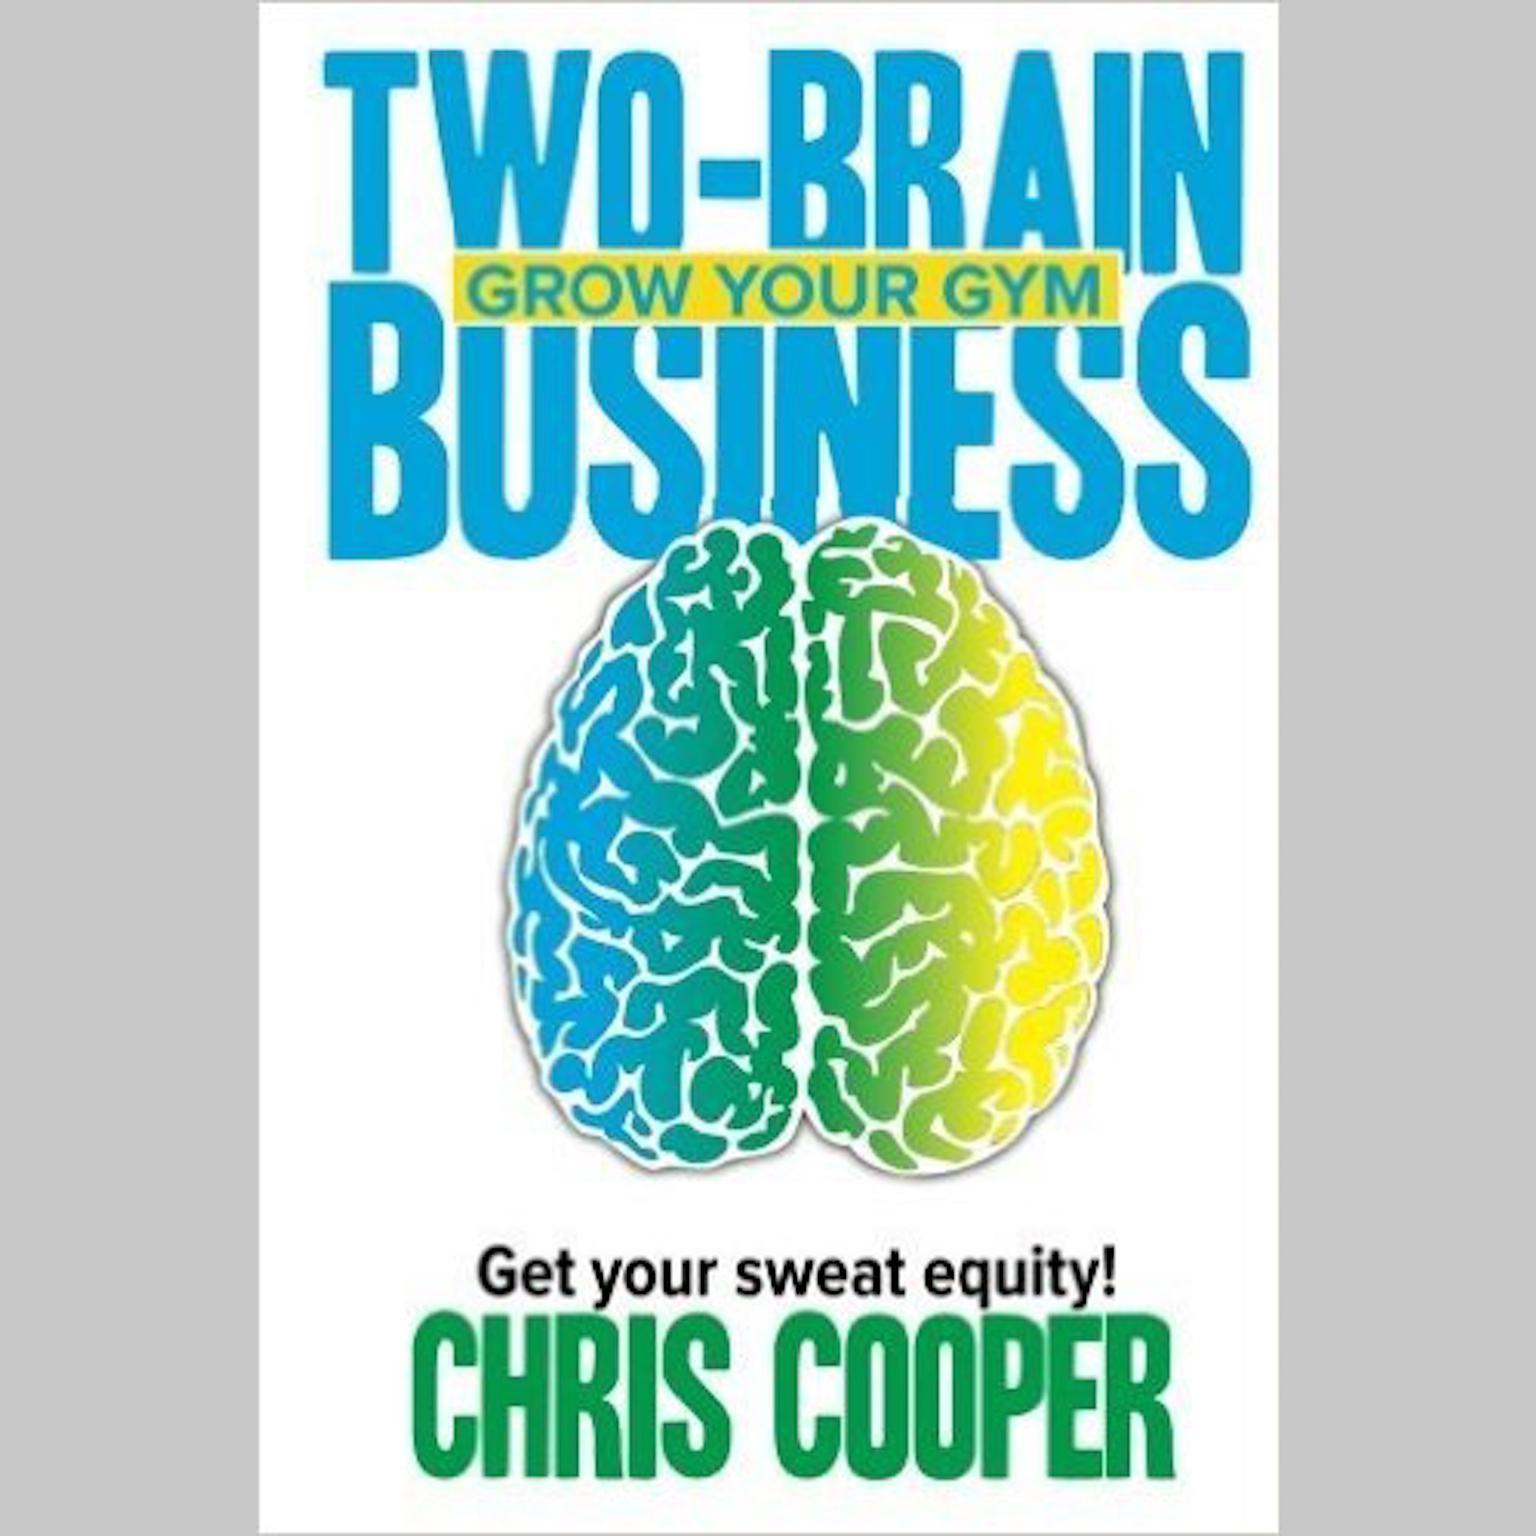 Two-Brain Business: Grow Your Gym Audiobook, by Chris Cooper